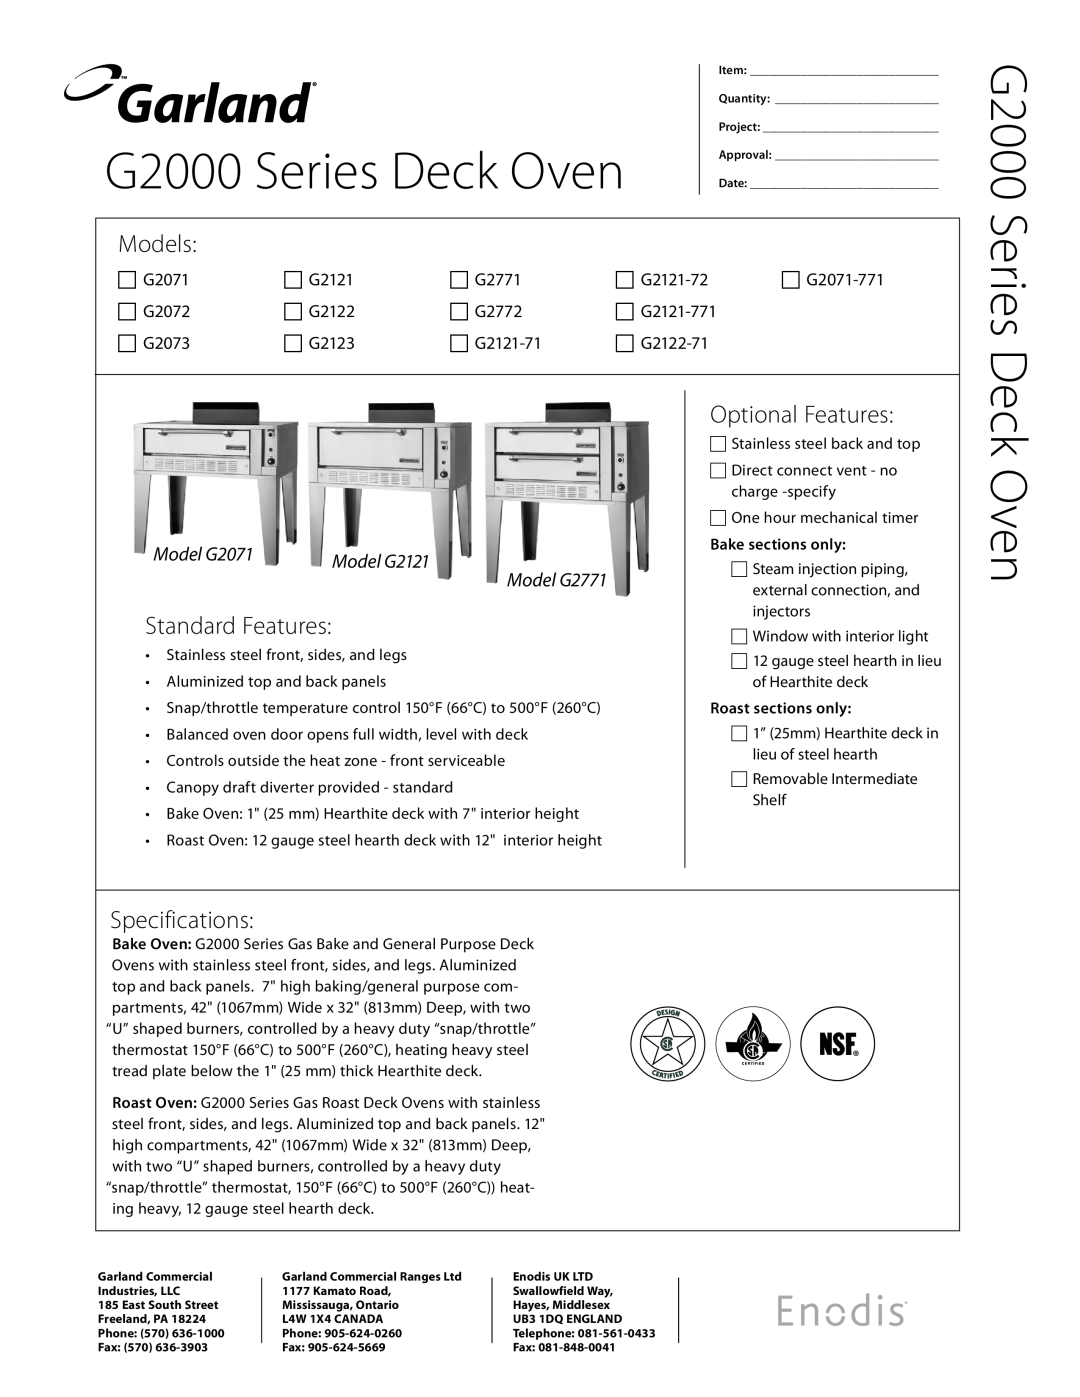 Garland specifications G2000 Series Deck Oven, Models, Standard Features, Optional Features, Specifications 